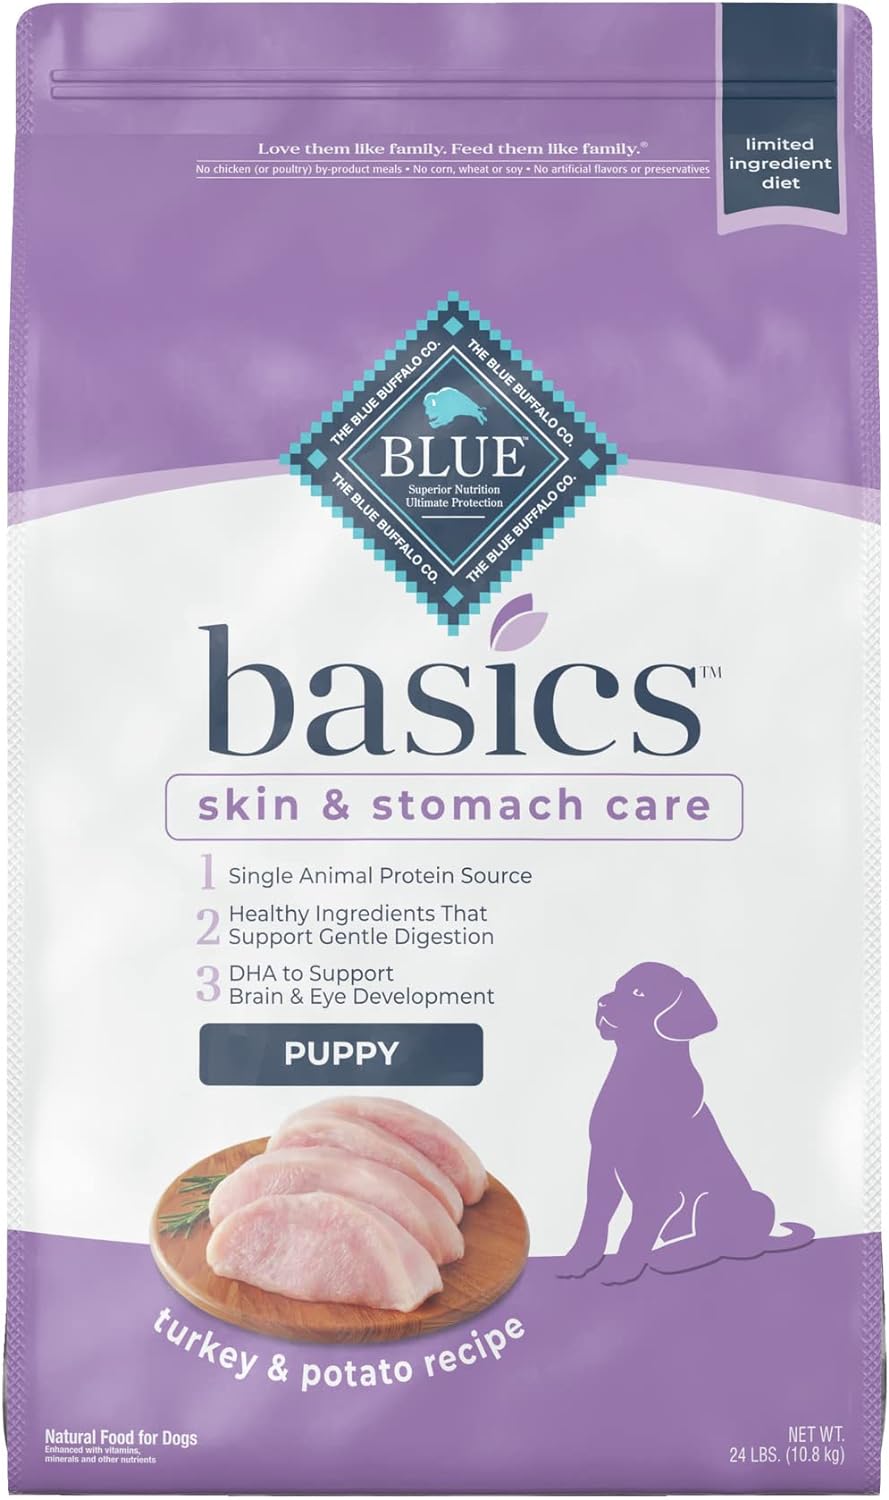 Blue Basics Limited Ingredient Diet Puppy Turkey and Potato Recipe Dry Dog Food – Gallery Image 1